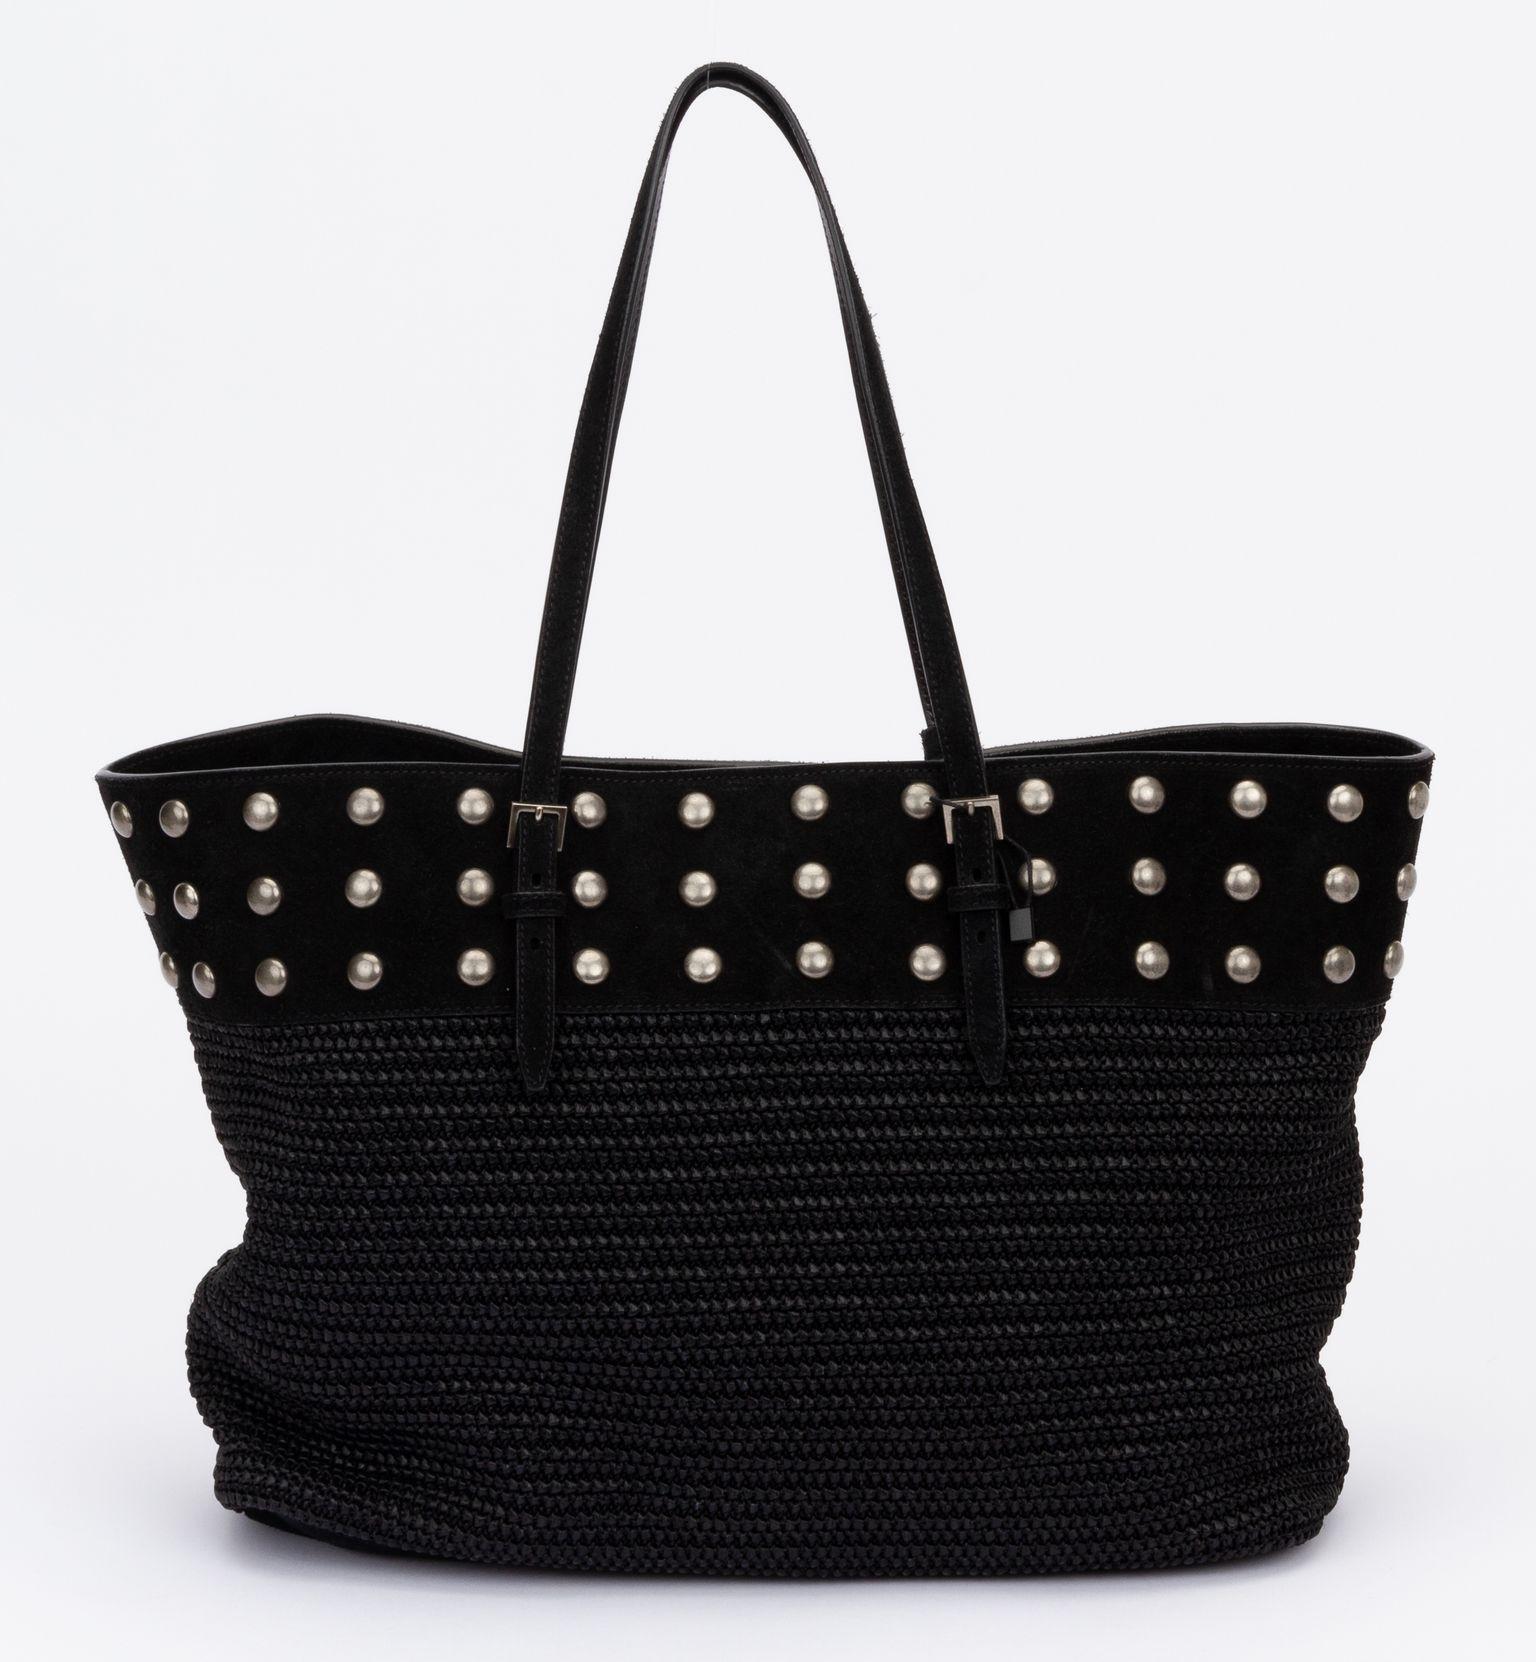 Yves Saint Laurent New Studded Black Tote In Excellent Condition For Sale In West Hollywood, CA